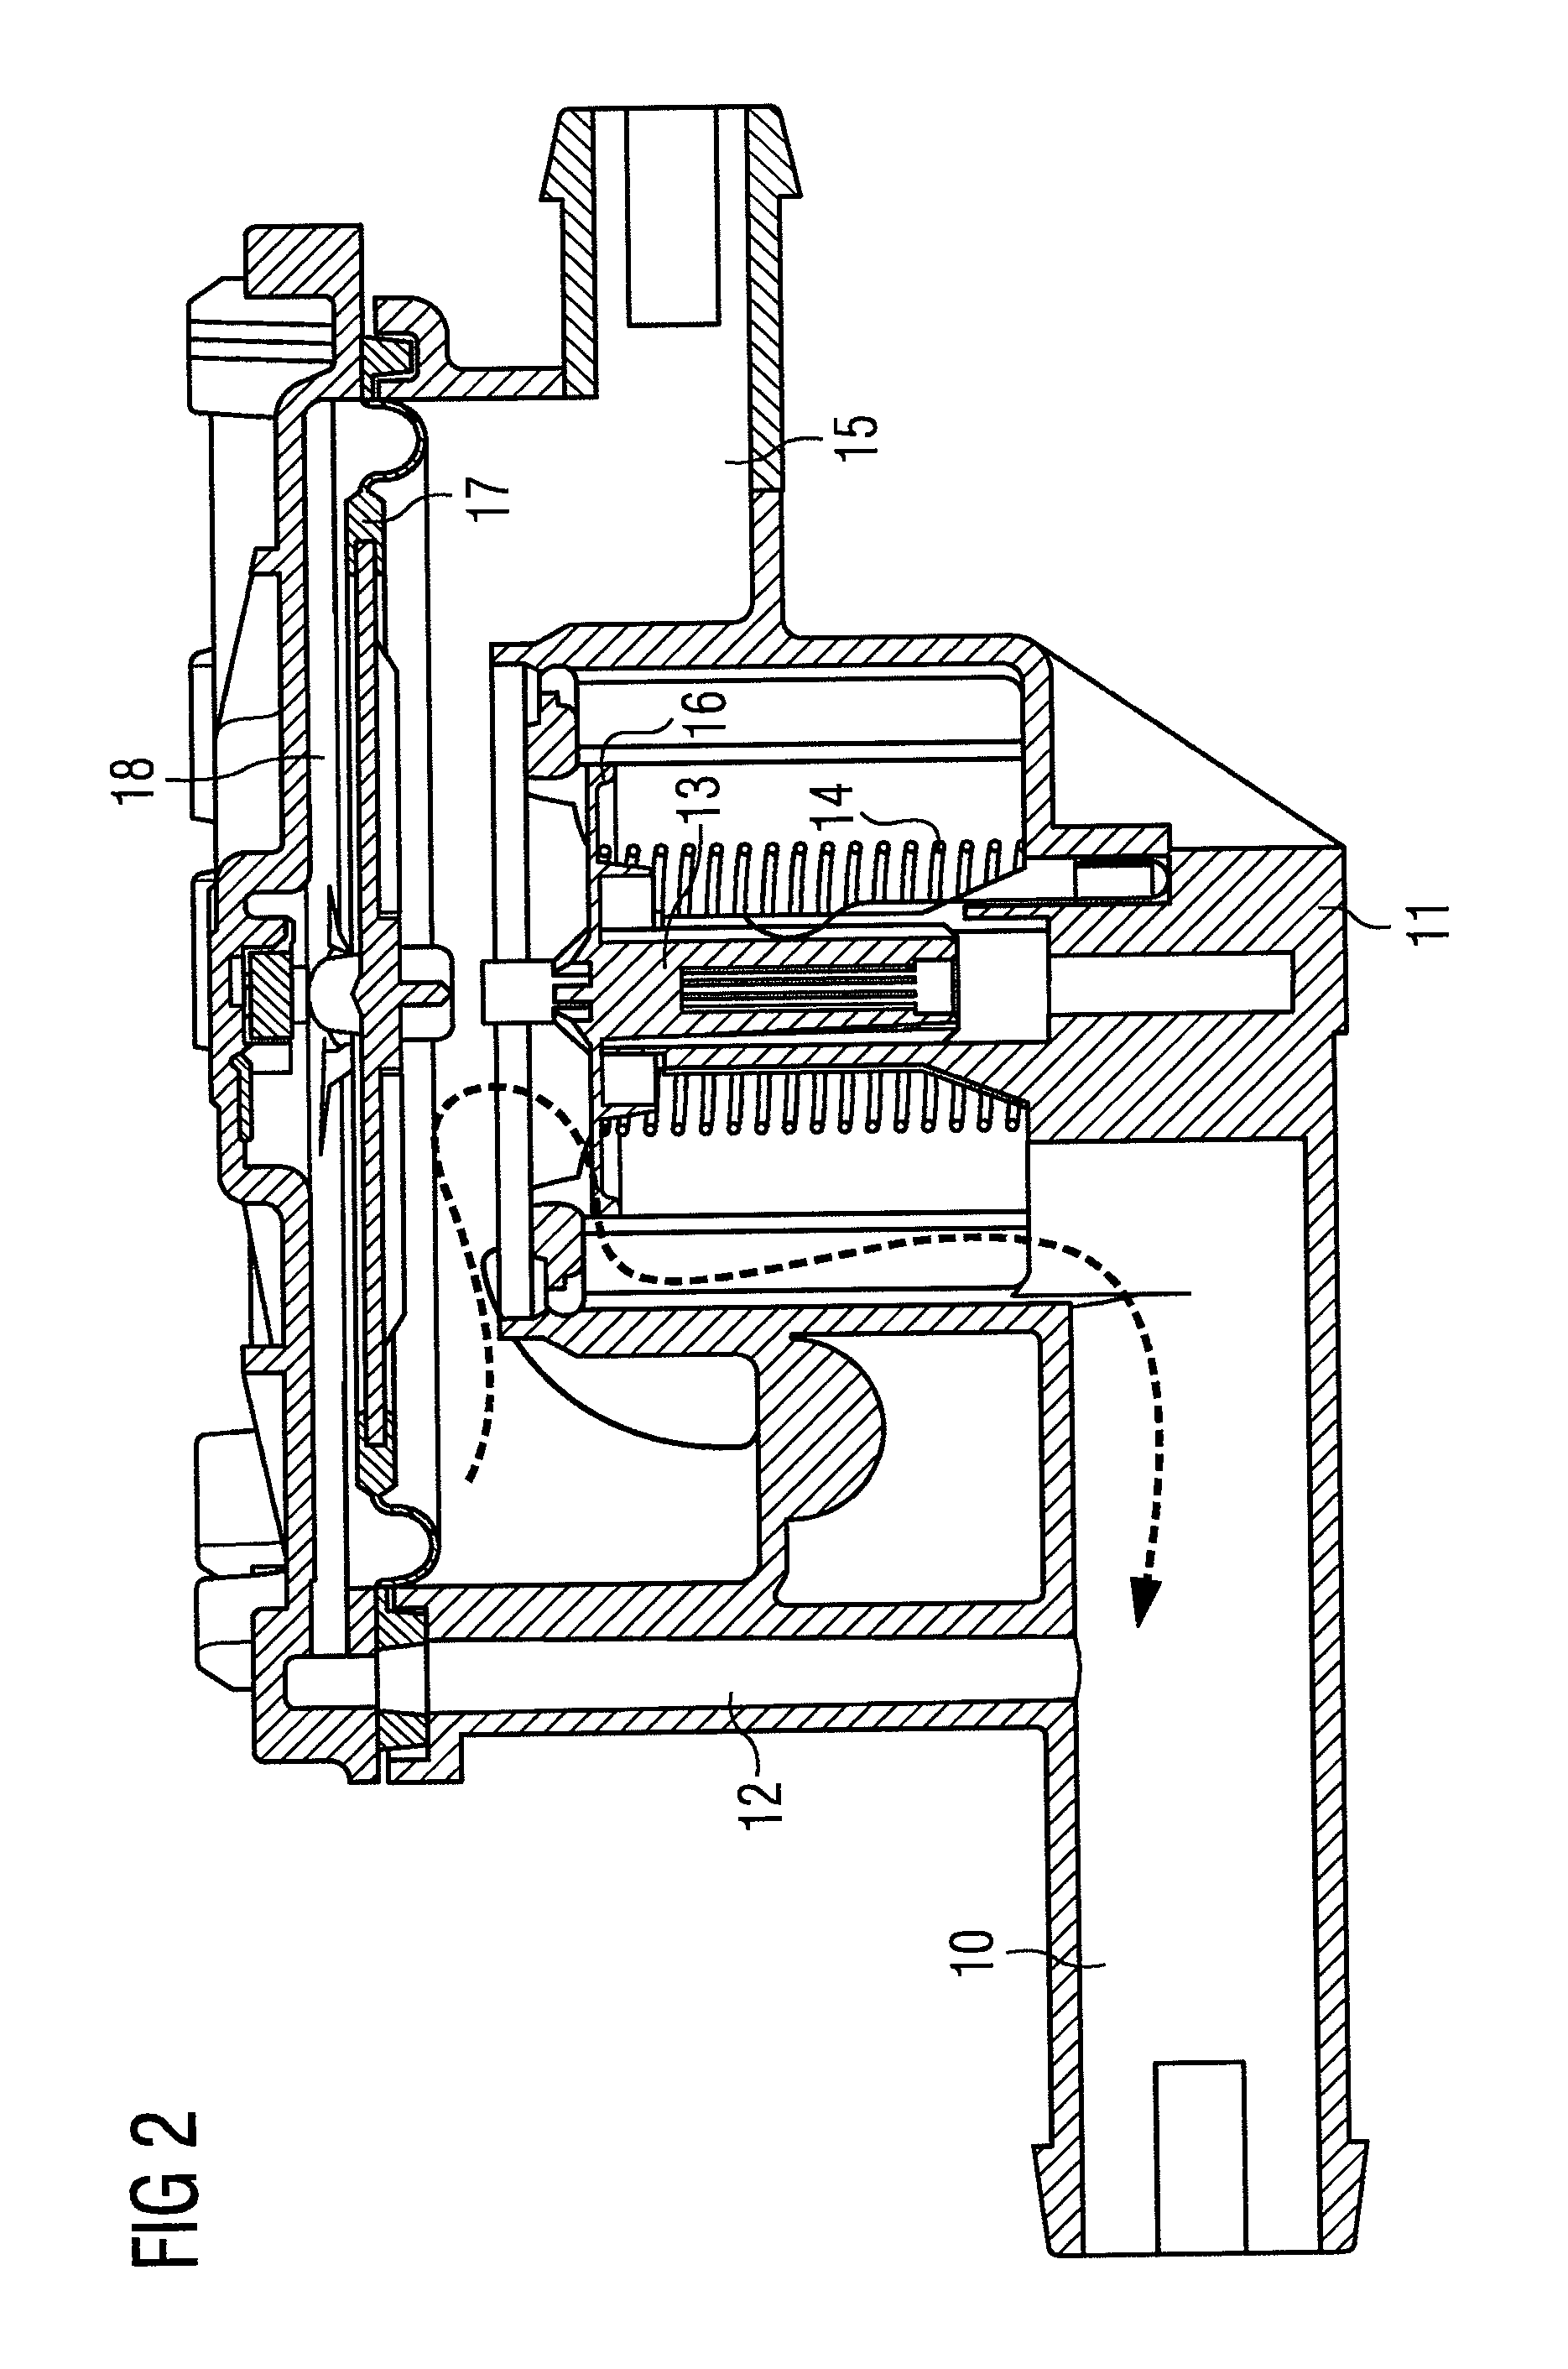 Internal combustion engine with improved tank cleaning